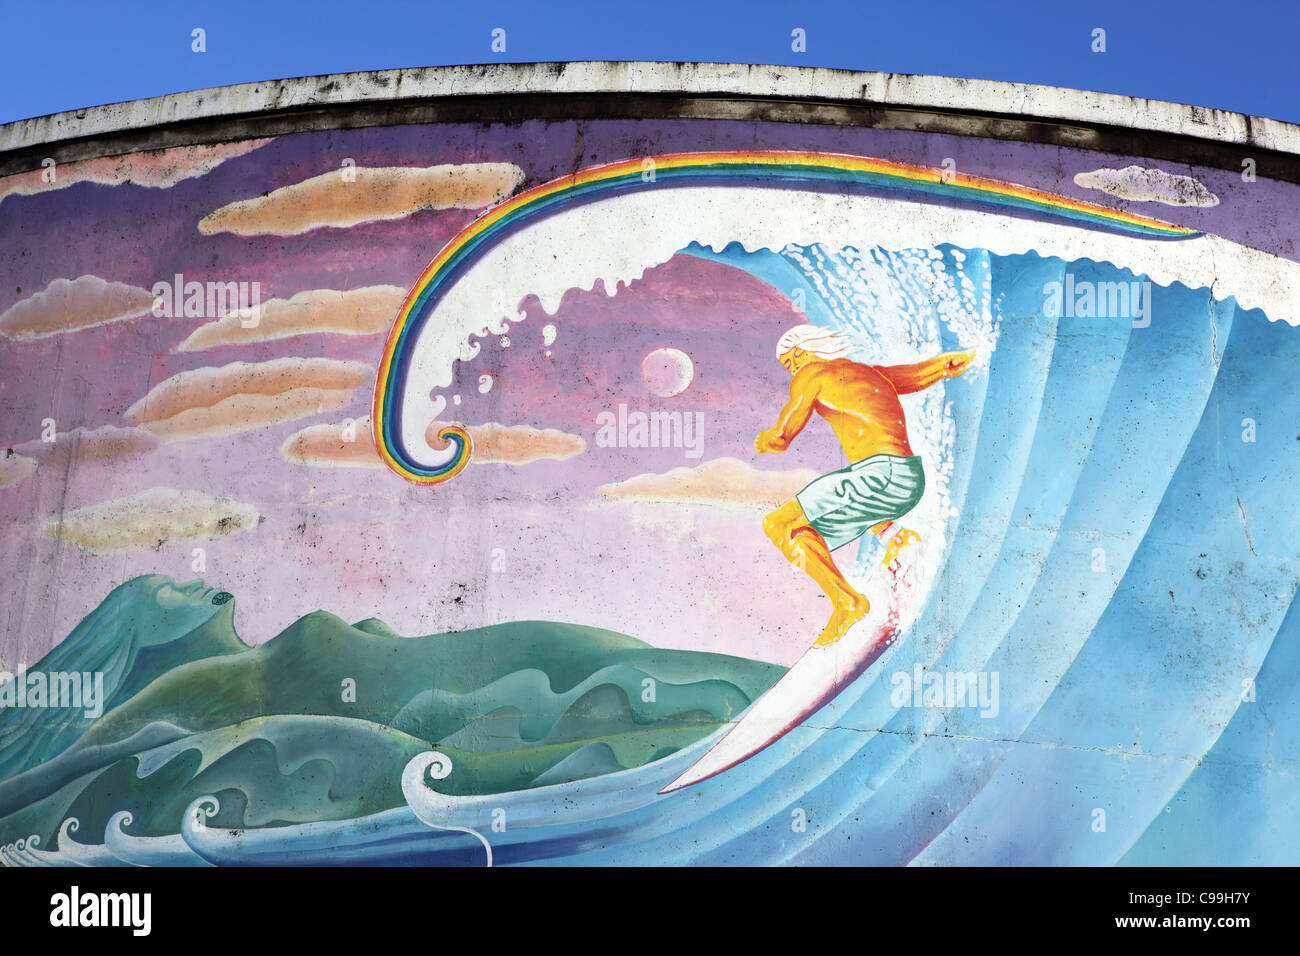 Support mural 1 surf